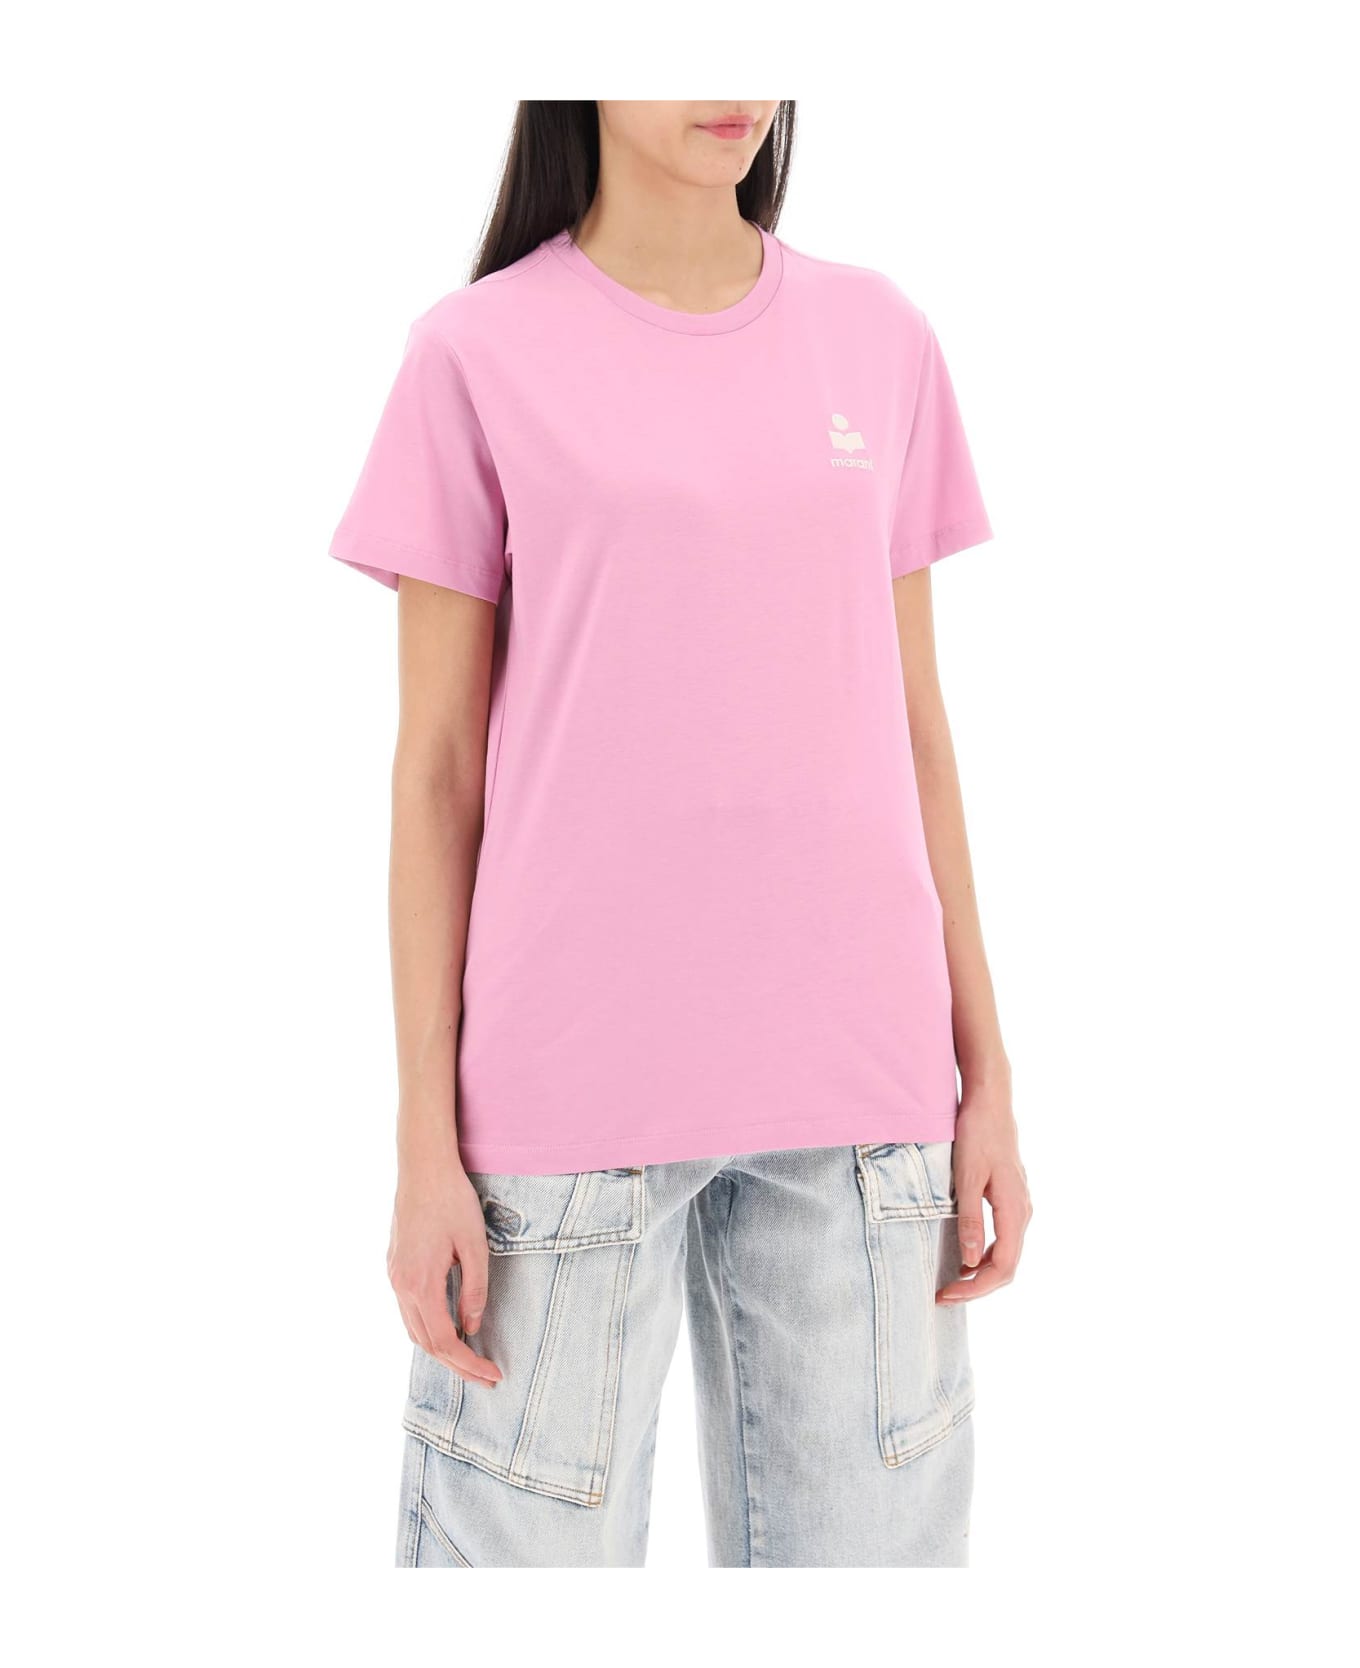 Marant Étoile Aby Regular Fit T-shirt - Candy Pink